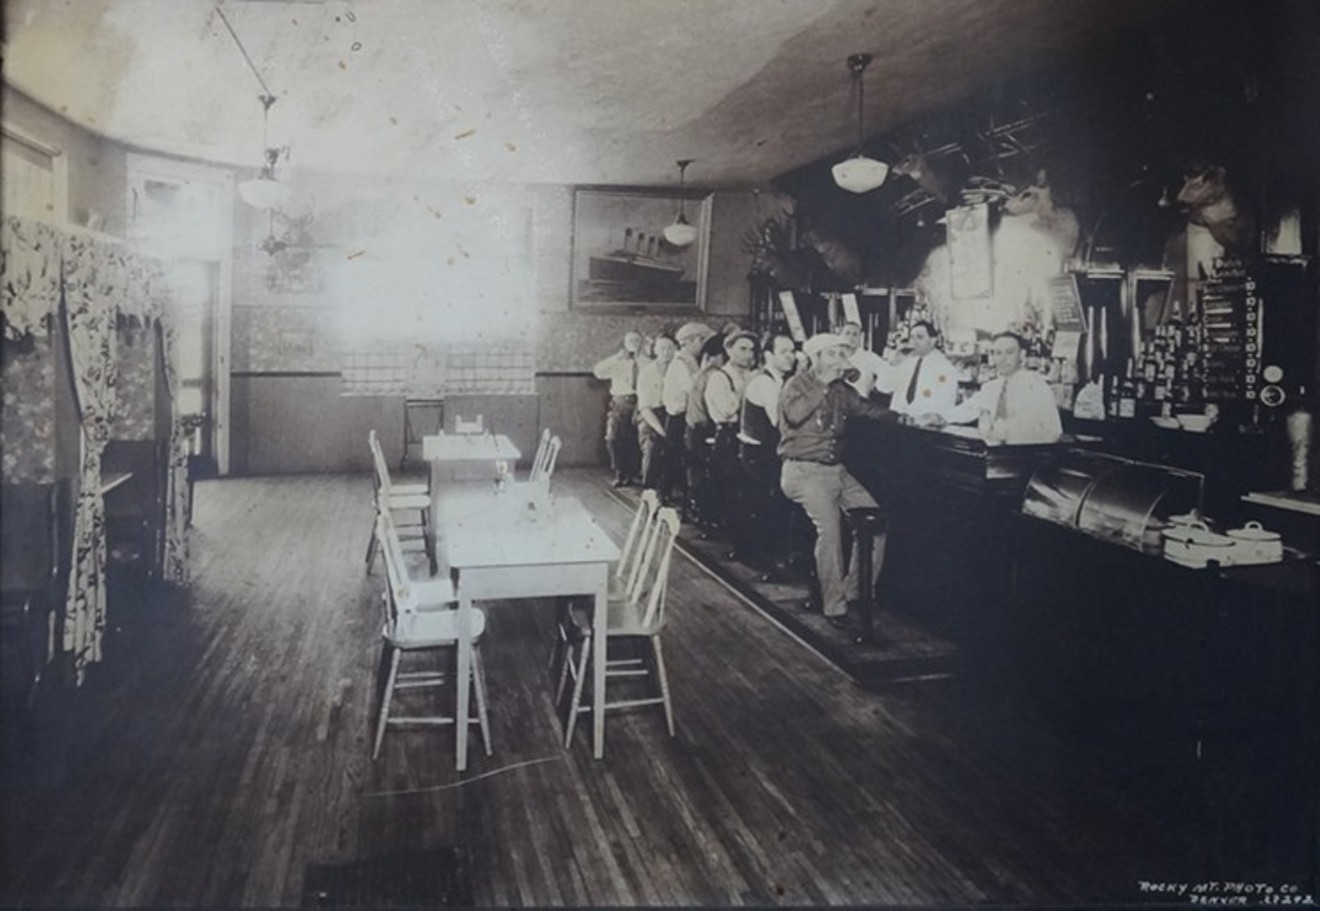 The bar crowd, circa 1905, now hangs on the wall at the Thunderbird.